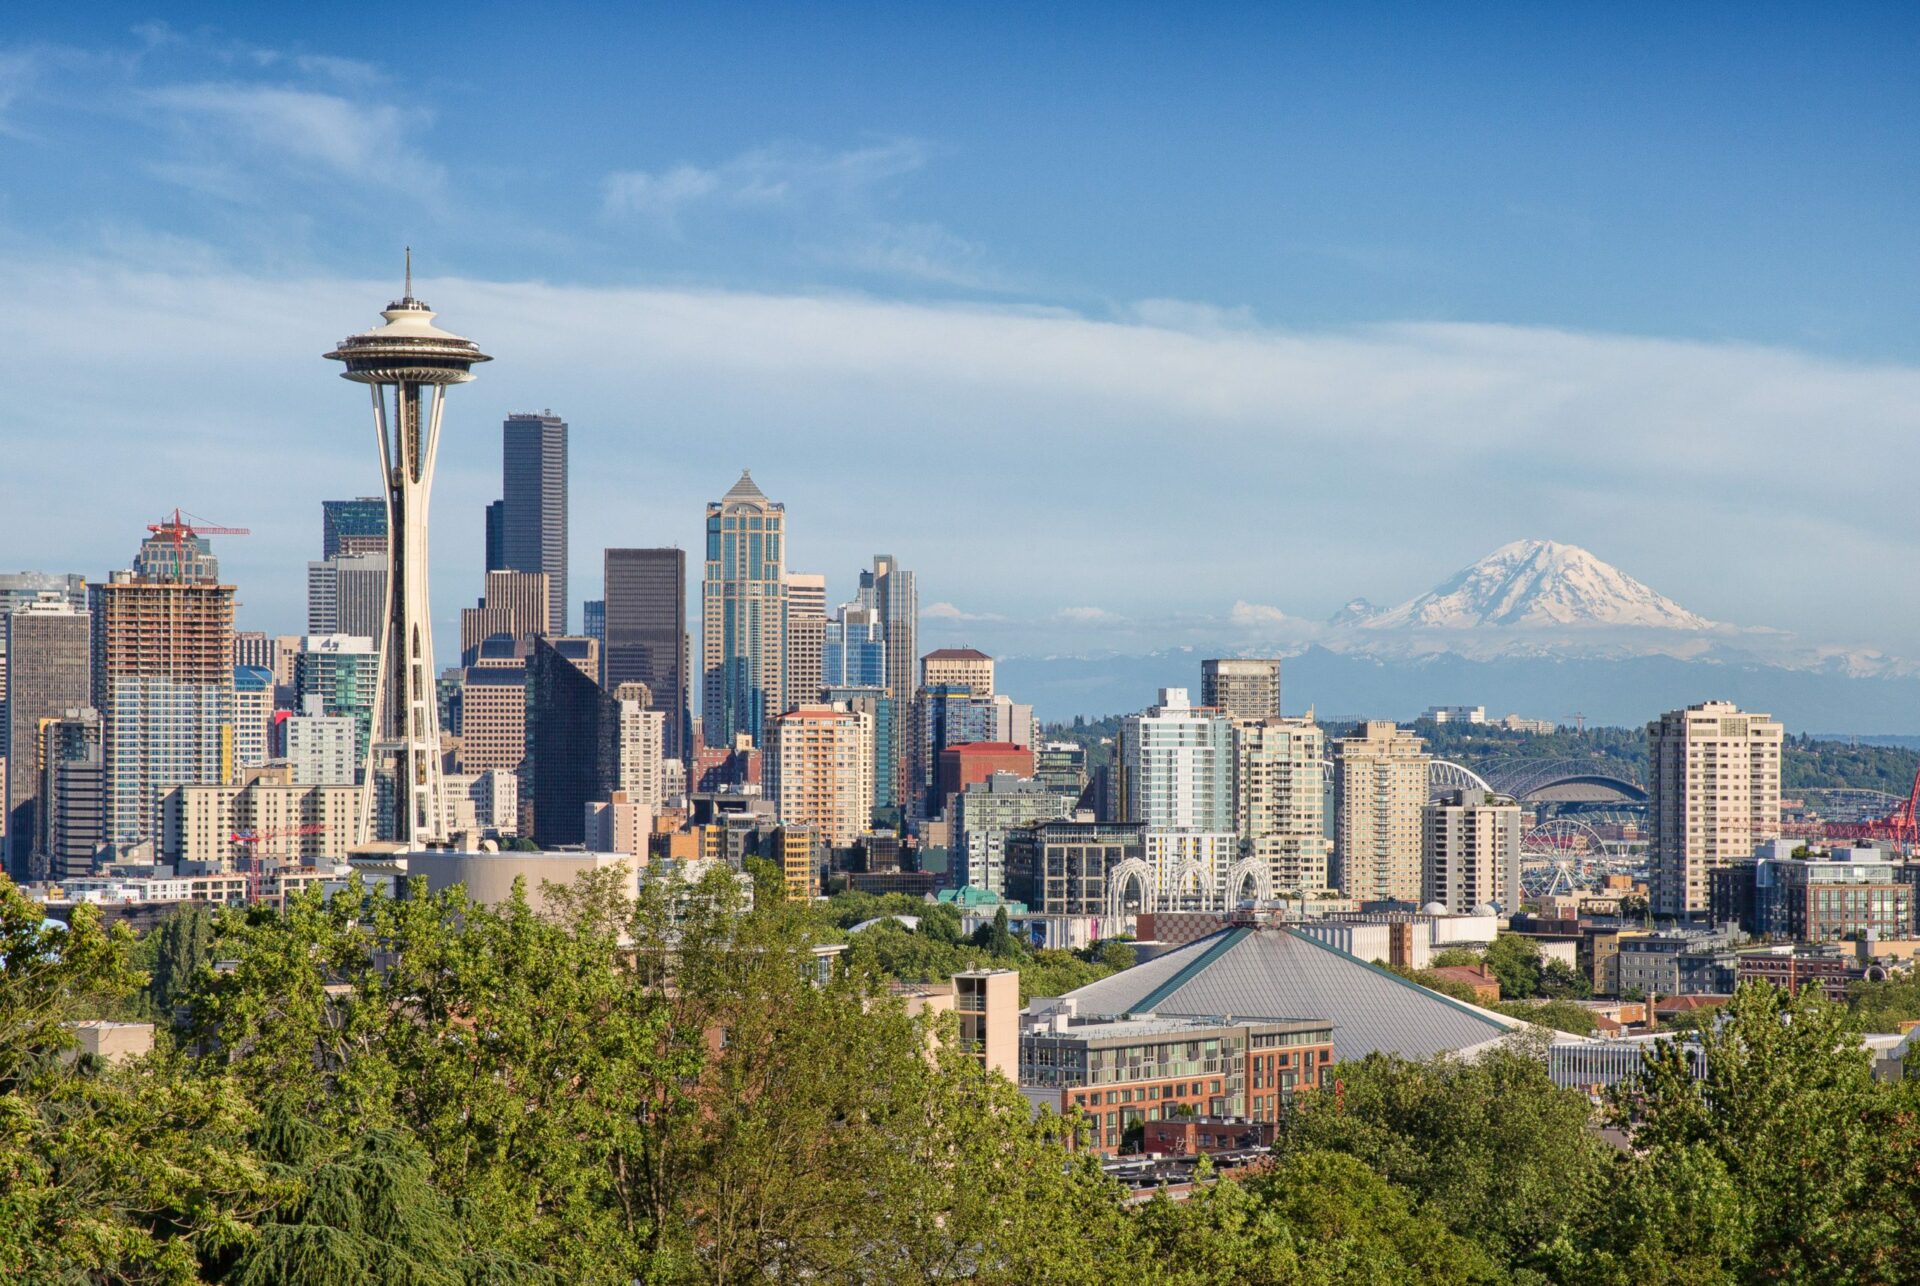 Built in Seattle: AccelByte Raises $60M to Grow Product and Engineering Teams